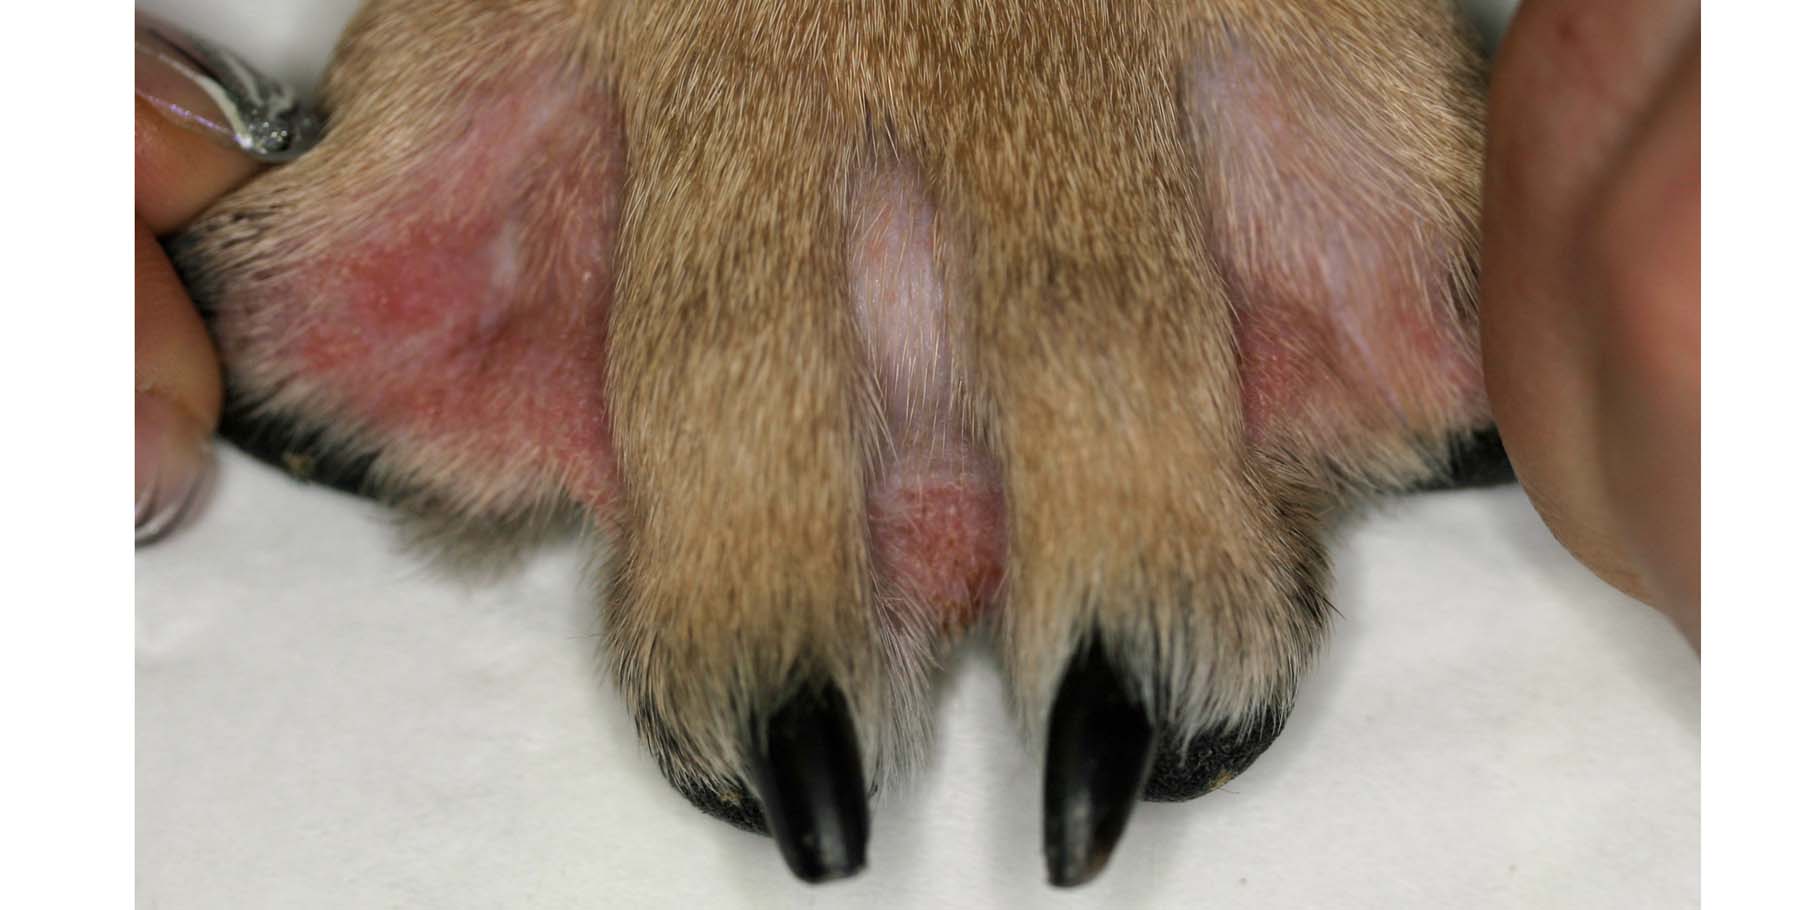 Canine Atopic Dermatitis with Secondary Malassezia Yeast Dysbiosis causing pododermatitis